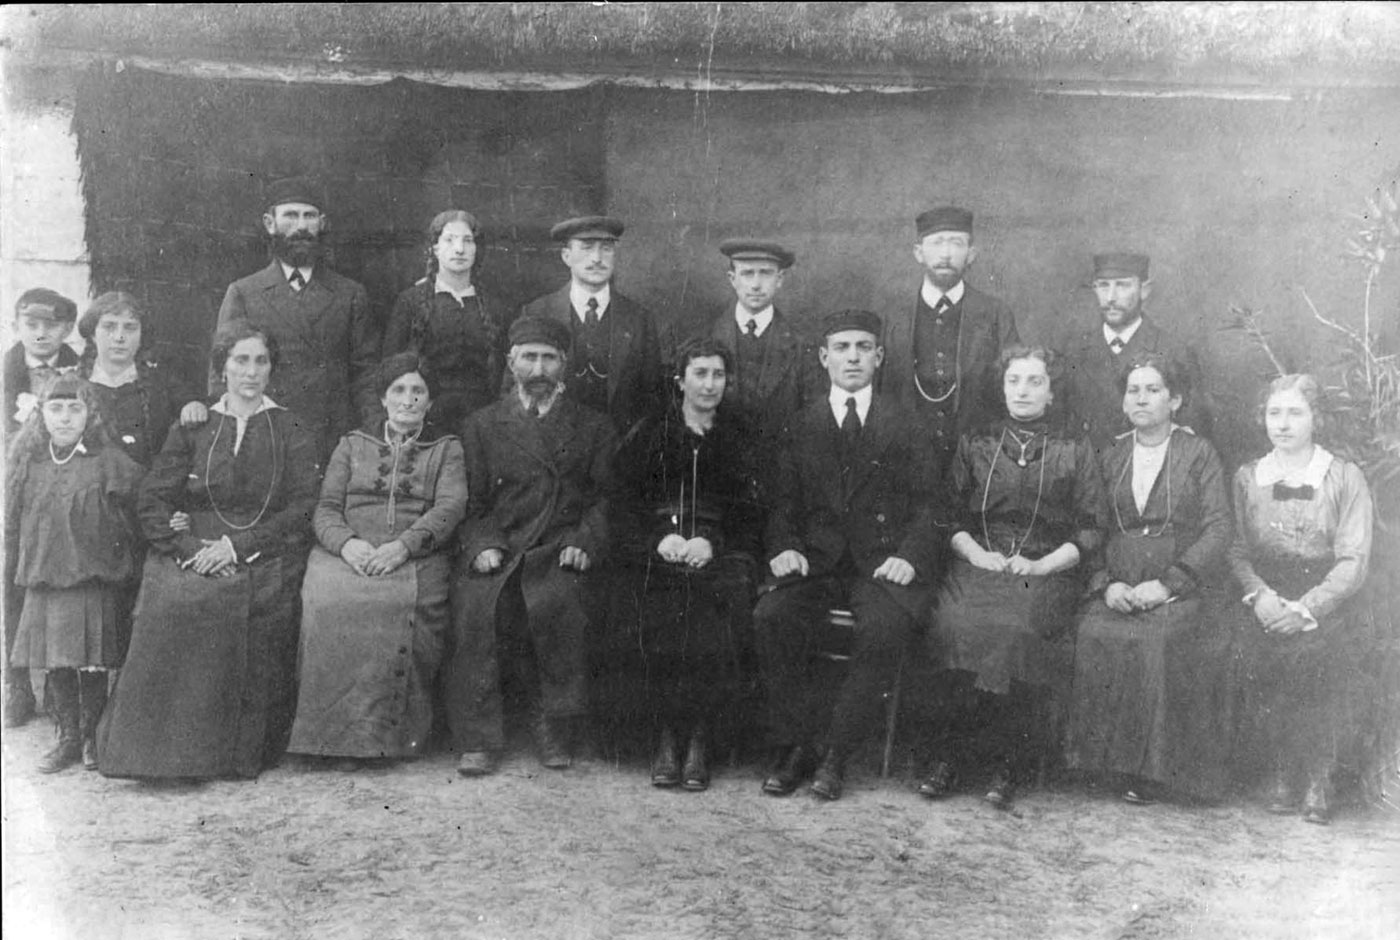 The Szainman family from Plonsk